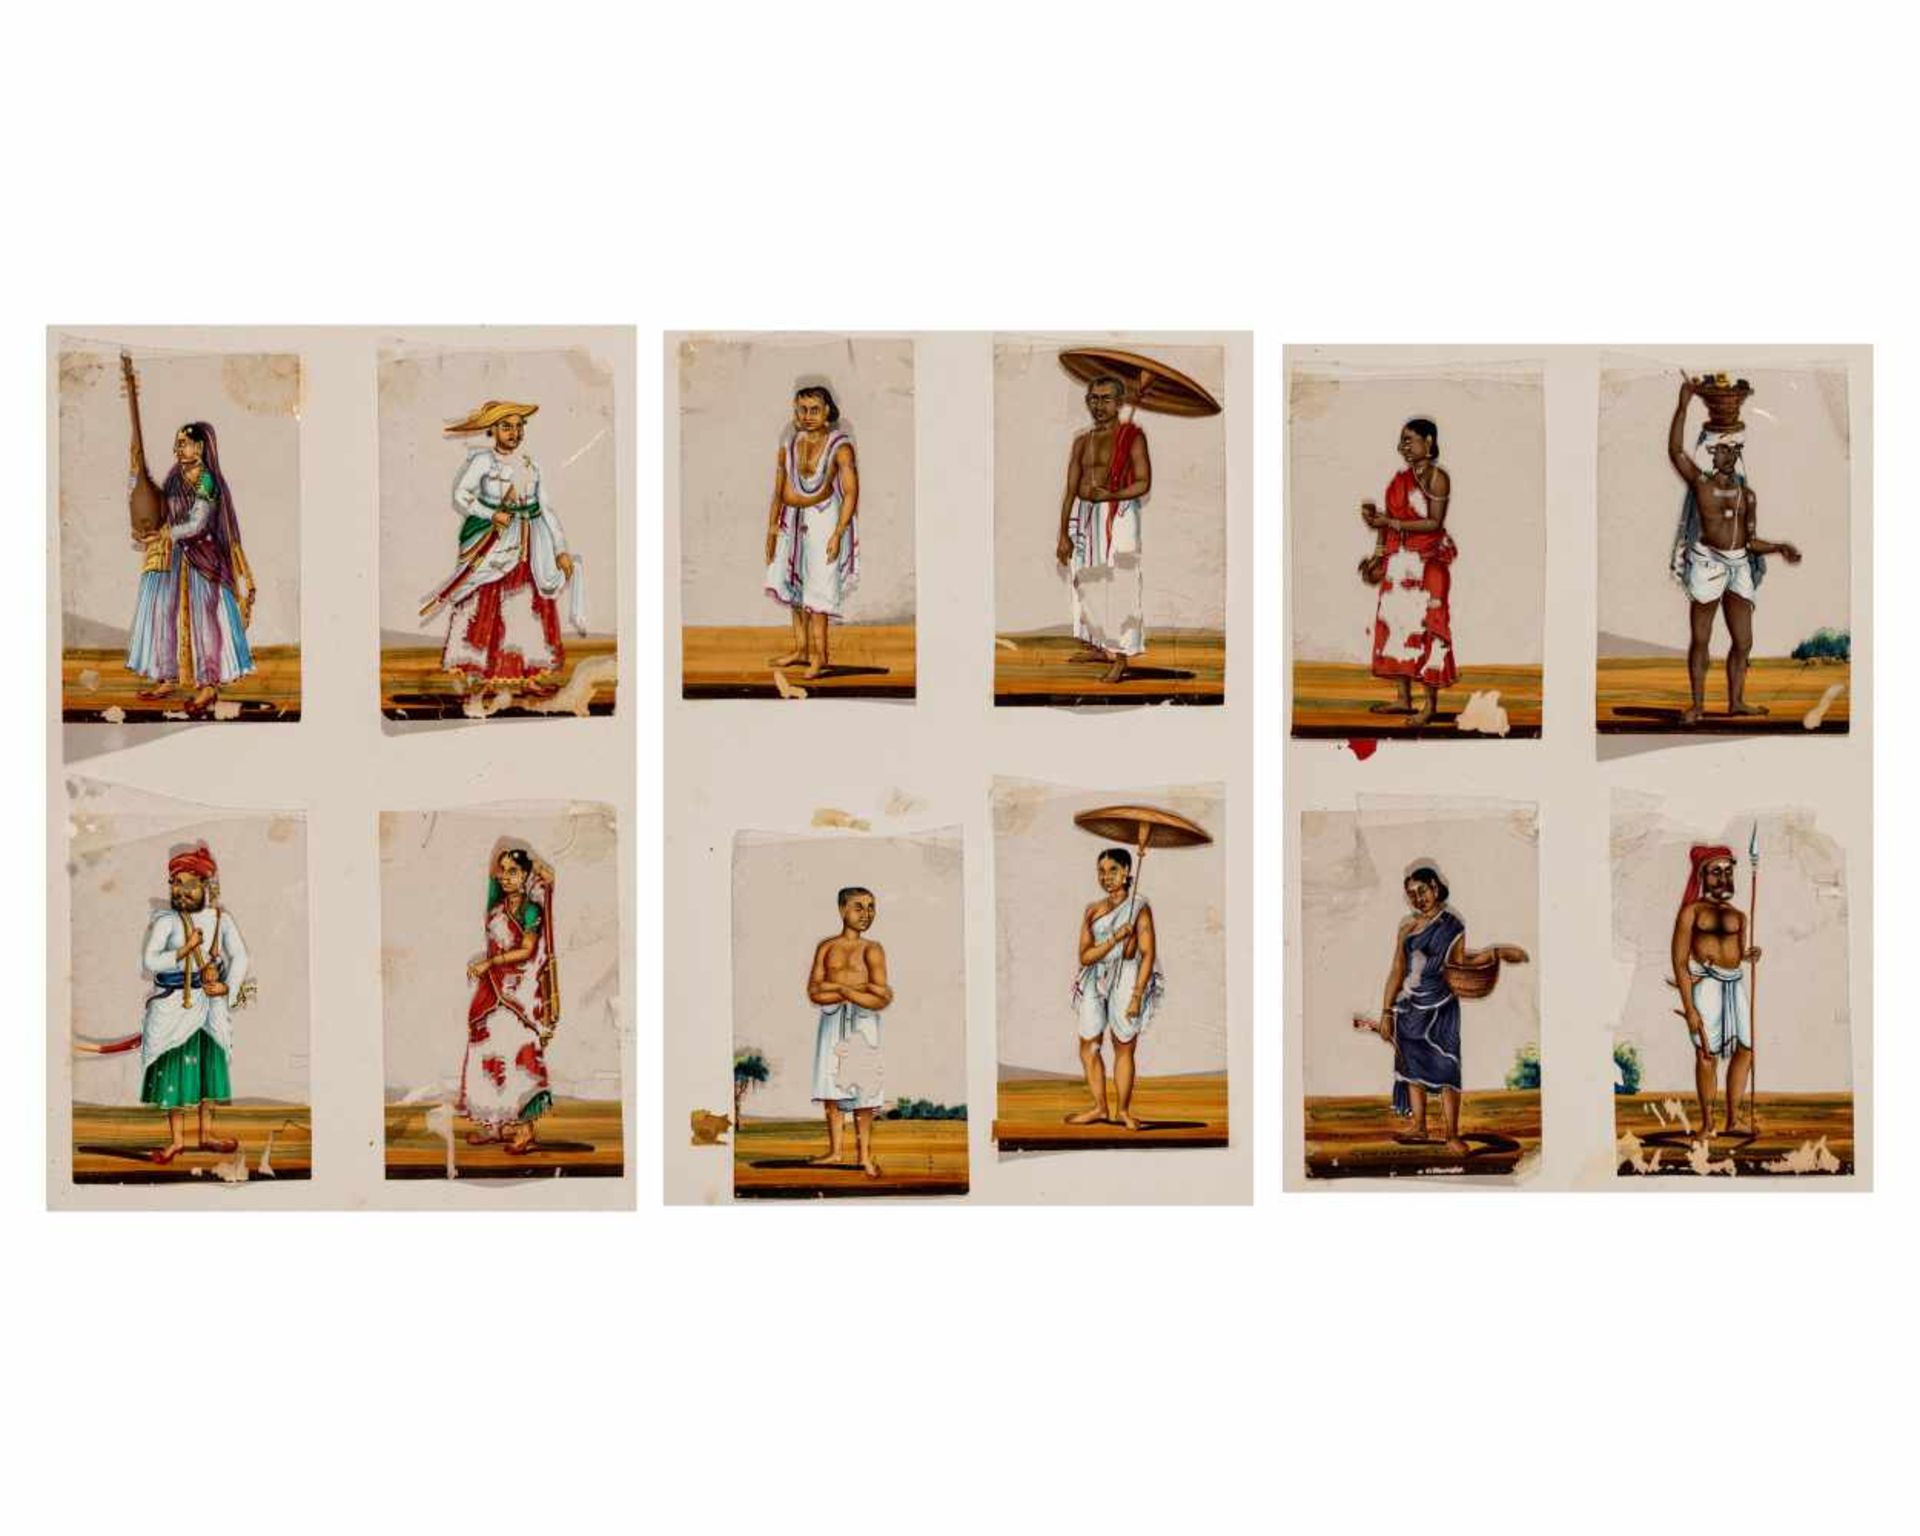 A GROUP OF 12 MINIATURE PORTRAITS ON CELLULOID – 1920sMiniature painting with colors on